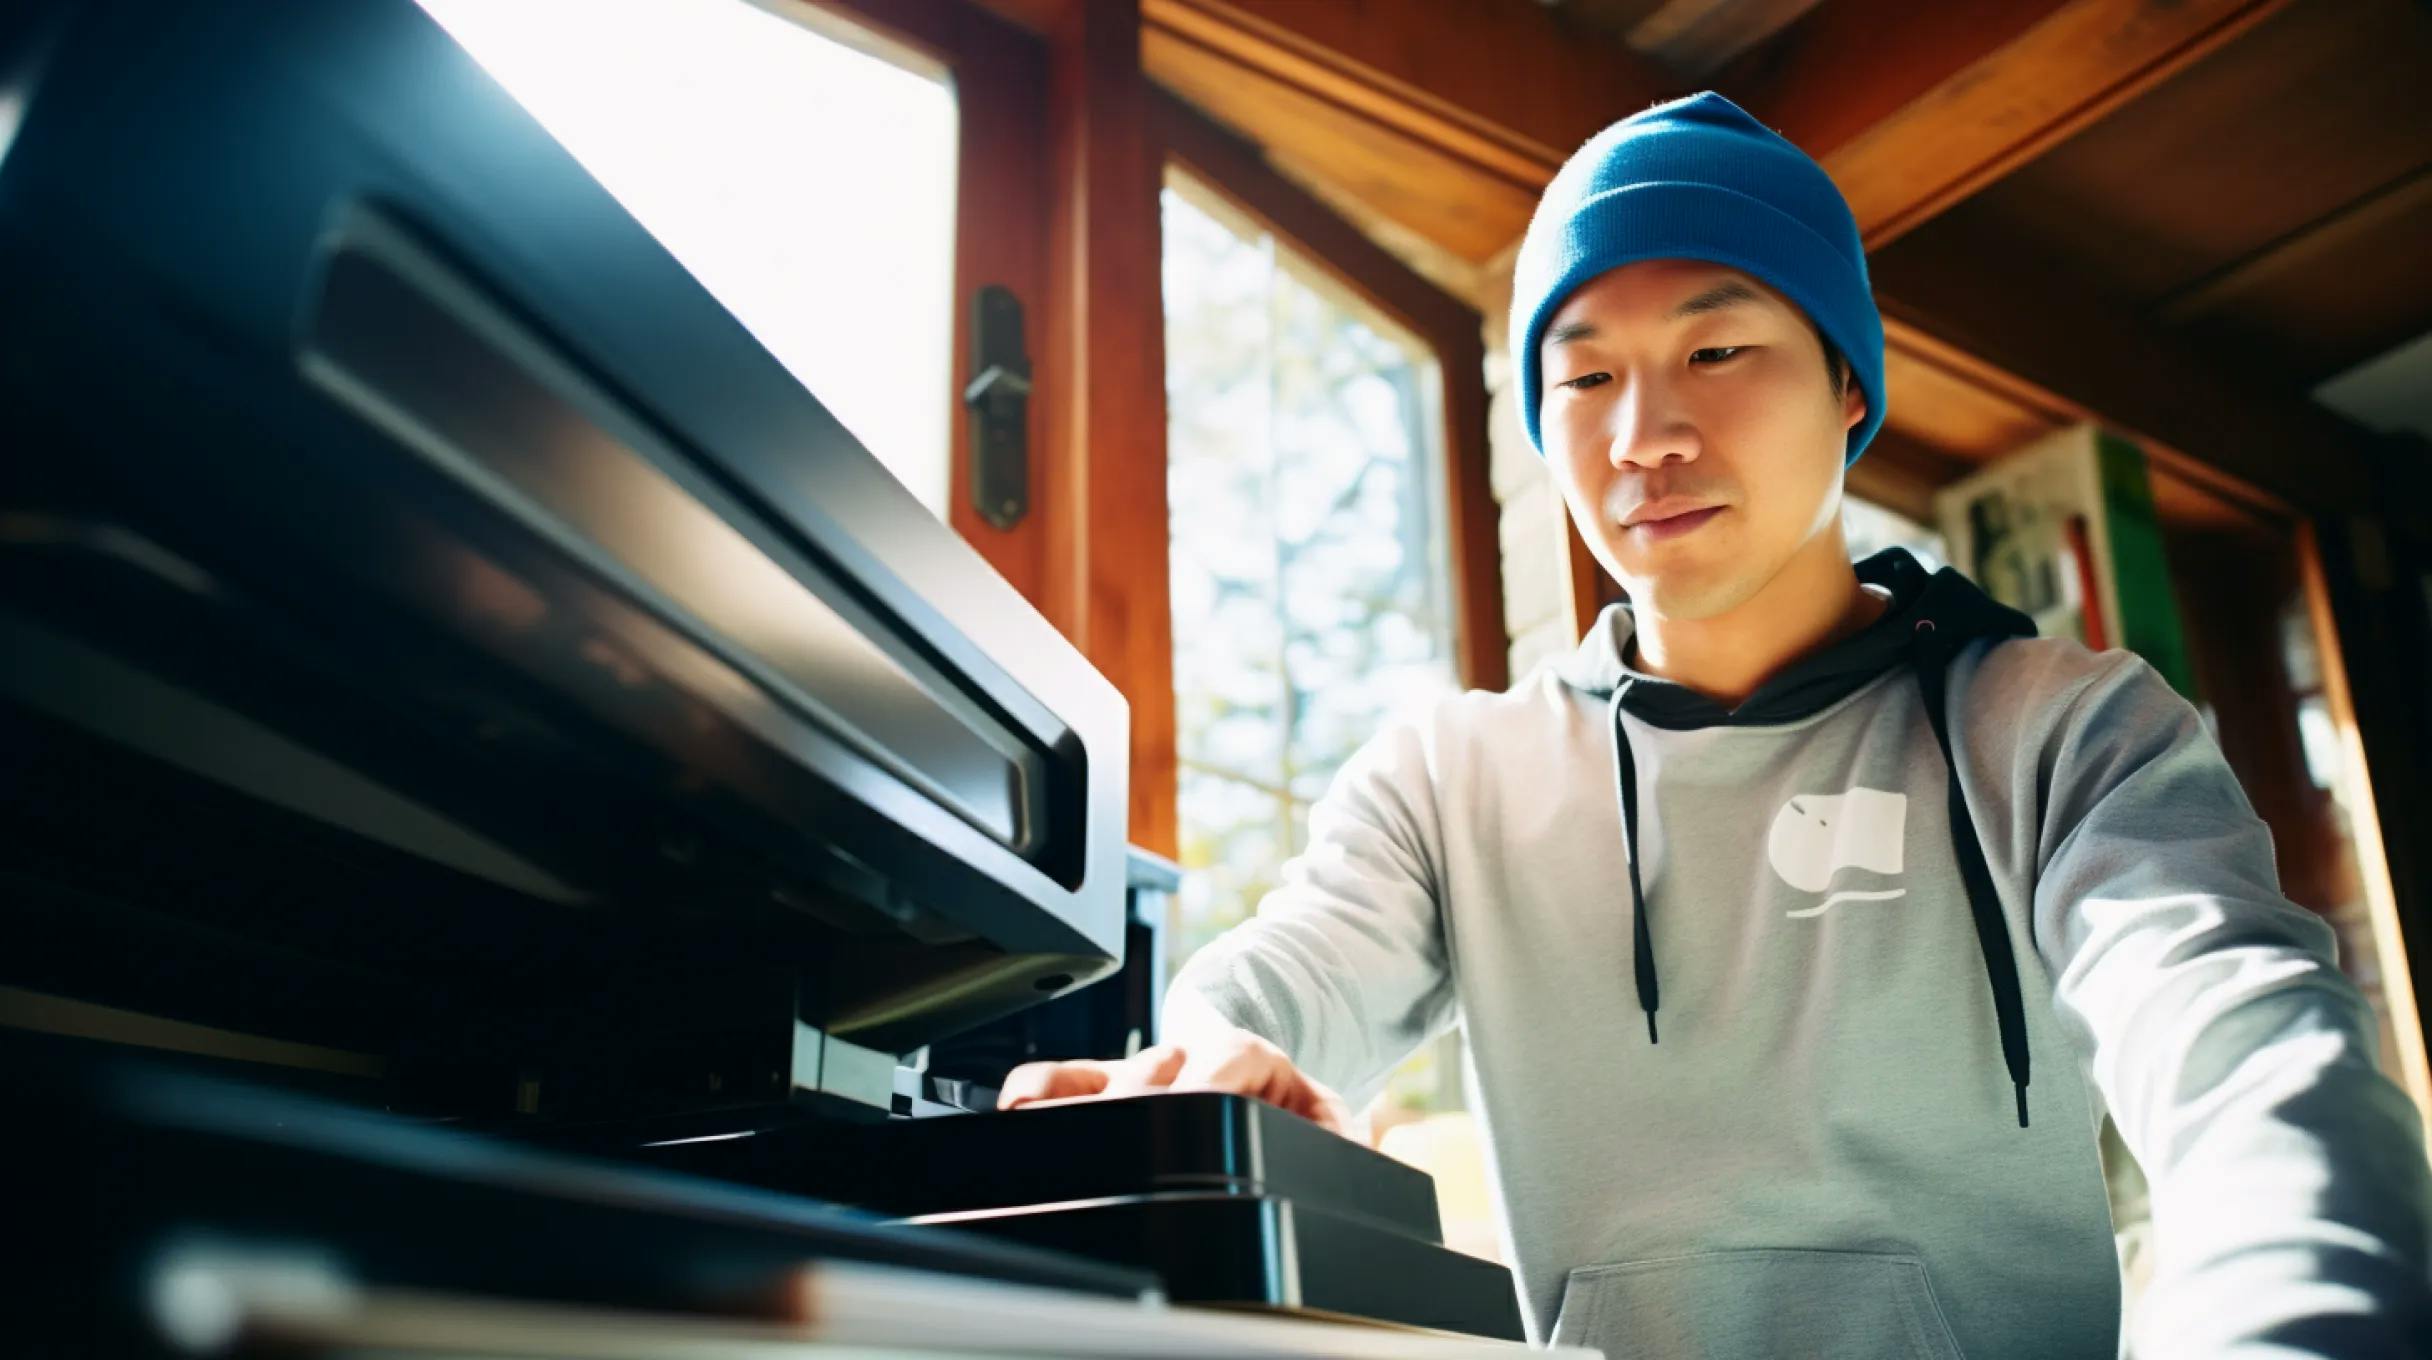 A man in a blue hat and sweatshirt is diligently working on a printer.